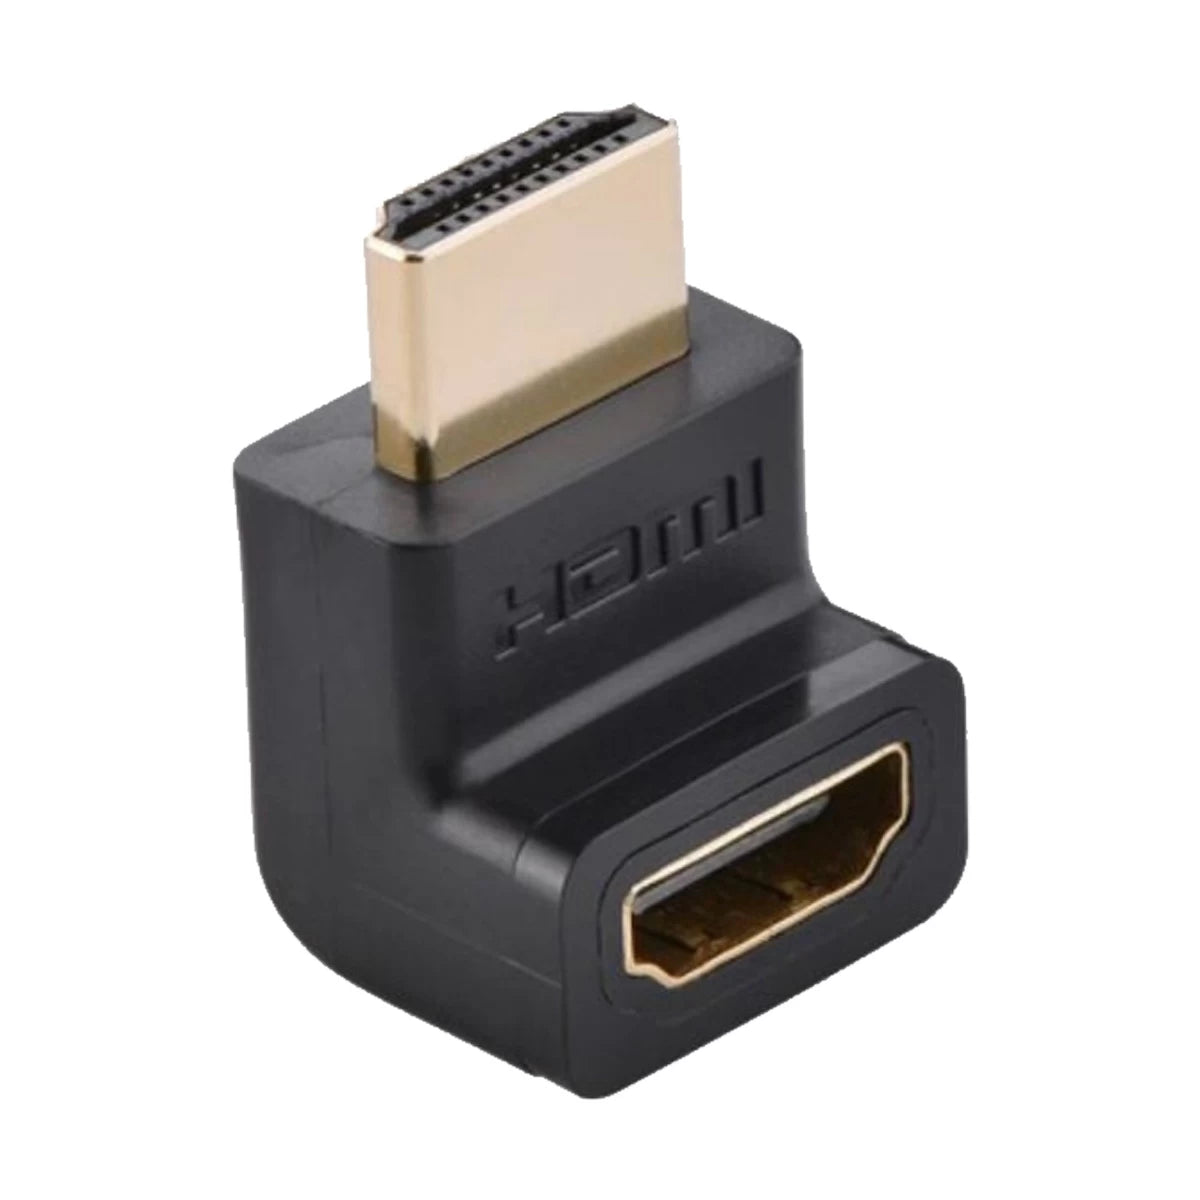 UGREEN HDMI Male to Female Adapter Up - Black